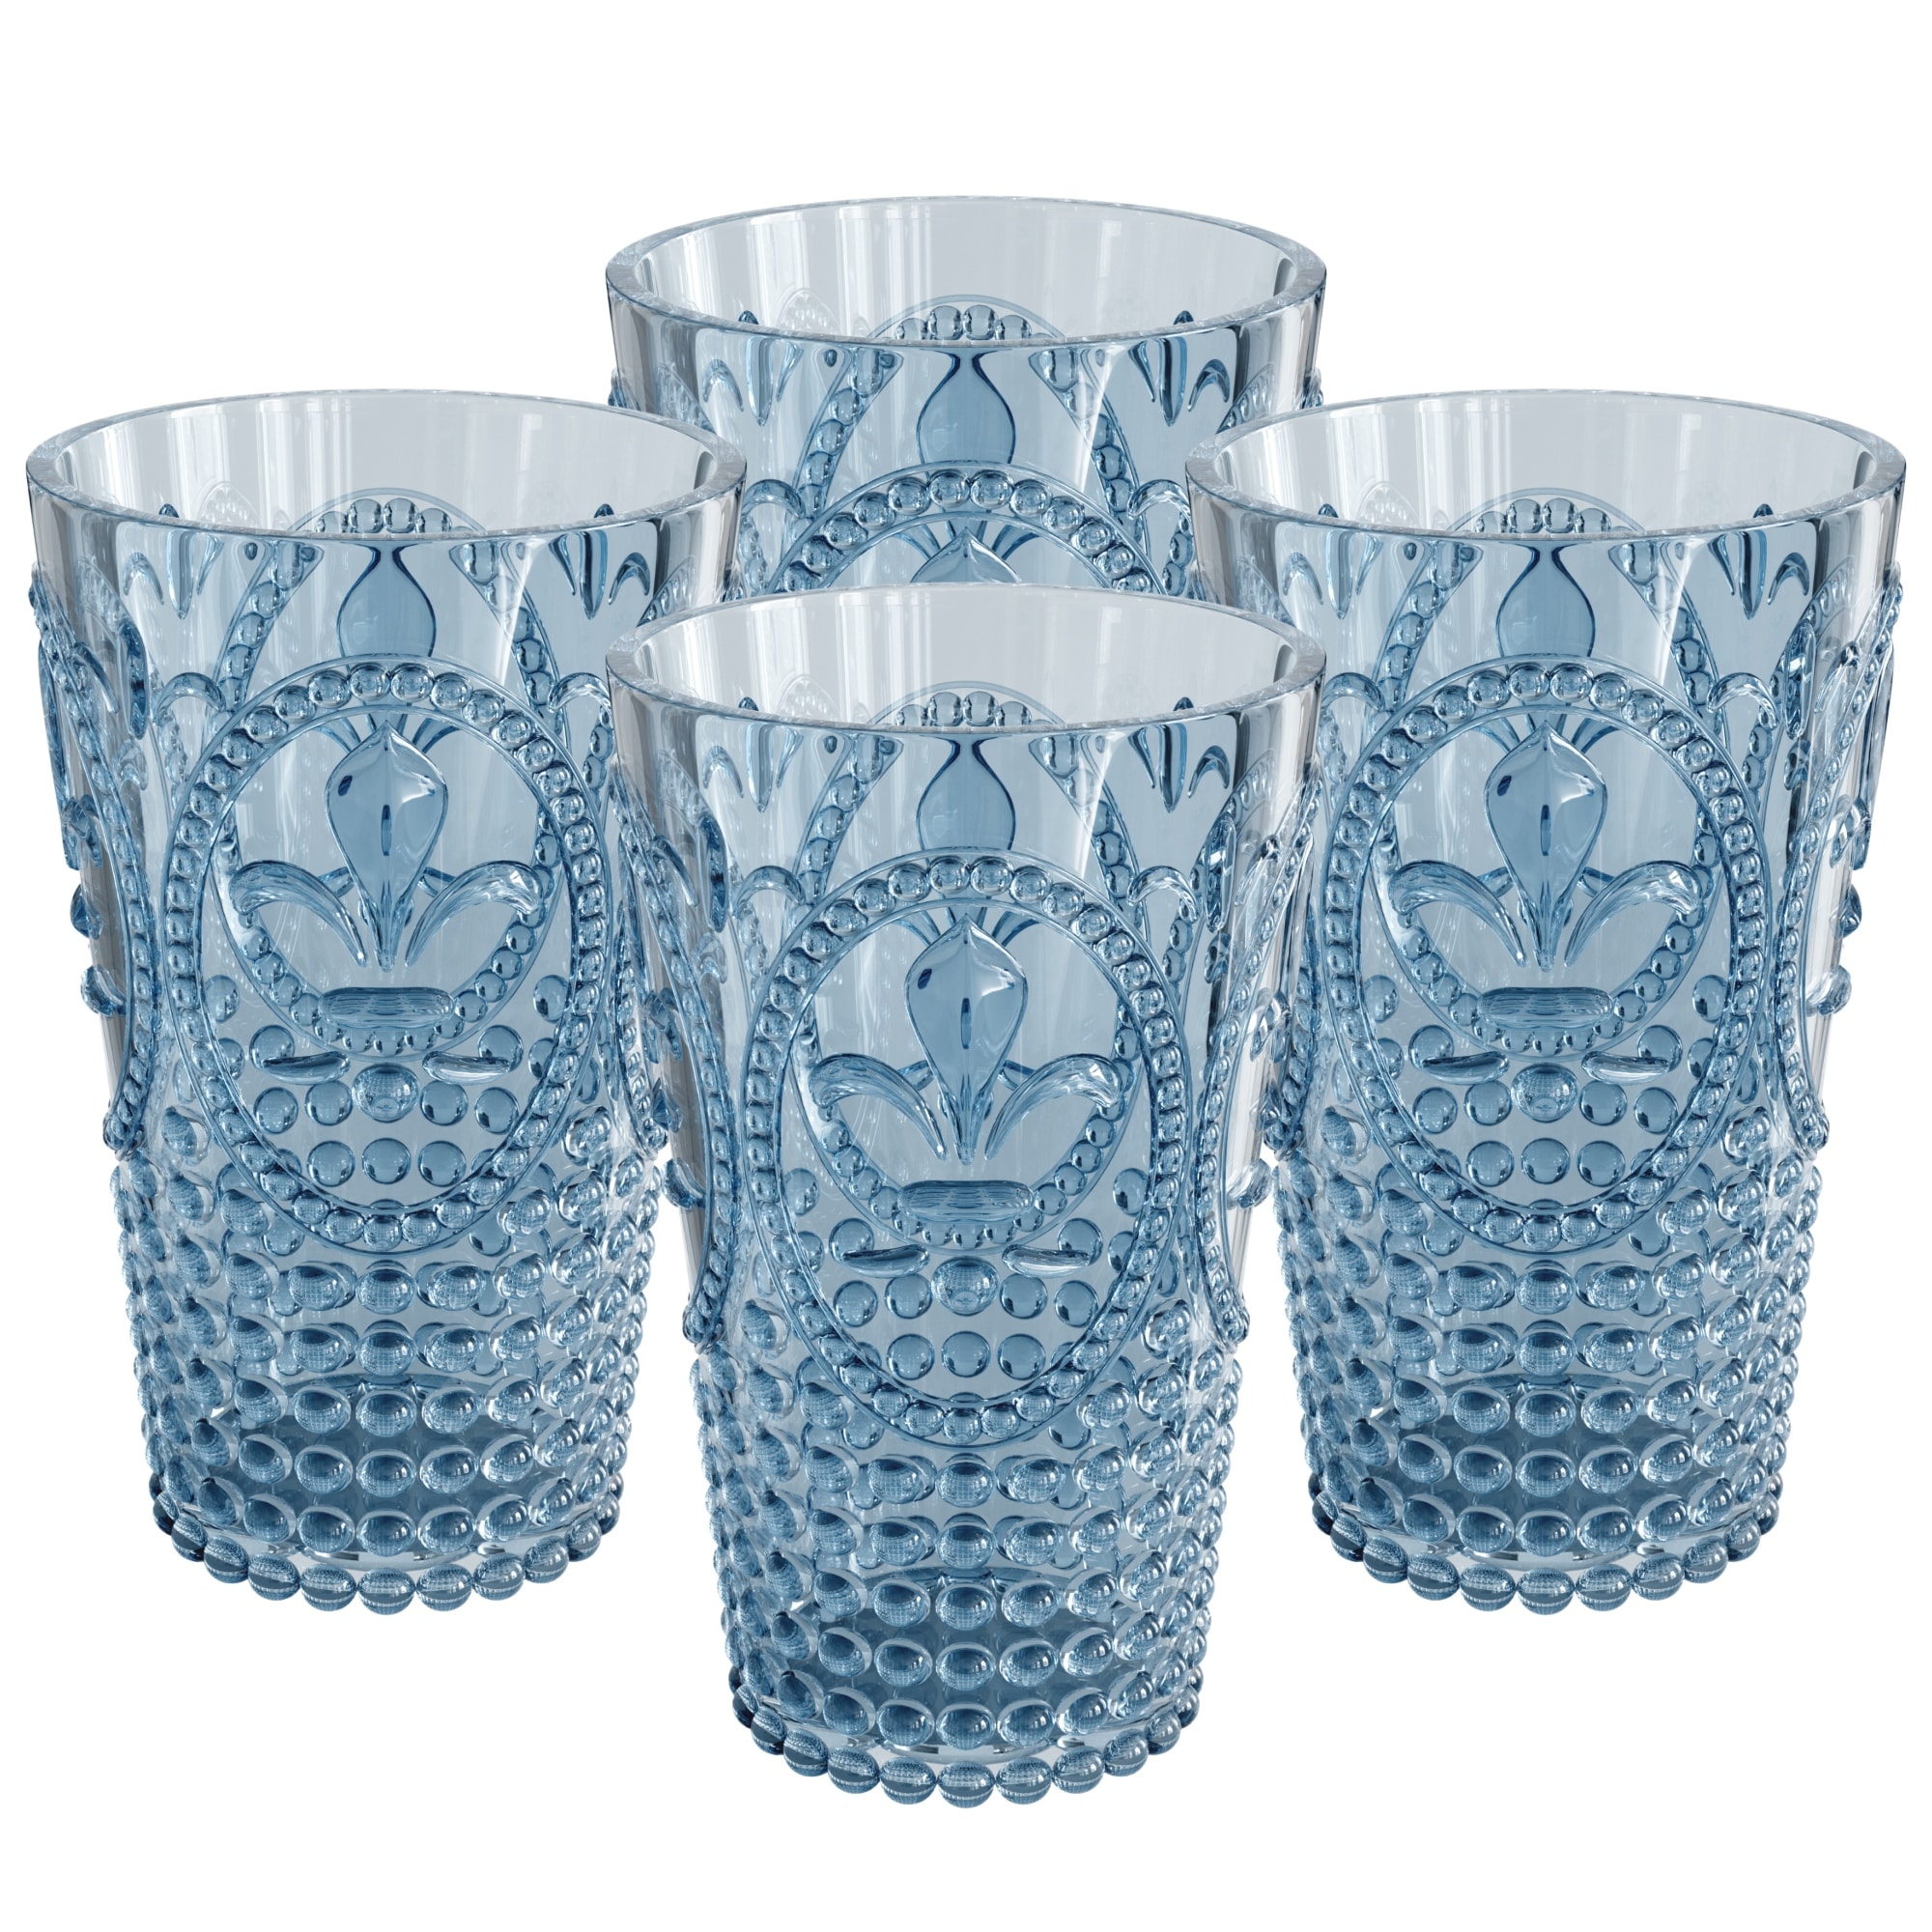 https://ak1.ostkcdn.com/images/products/is/images/direct/81cd6bb432a411b9f8dfc4be8e709c85821f4fac/Elle-Decor-Acrylic-Water-HiBall-Tumblers%2C-Set-of-4.jpg